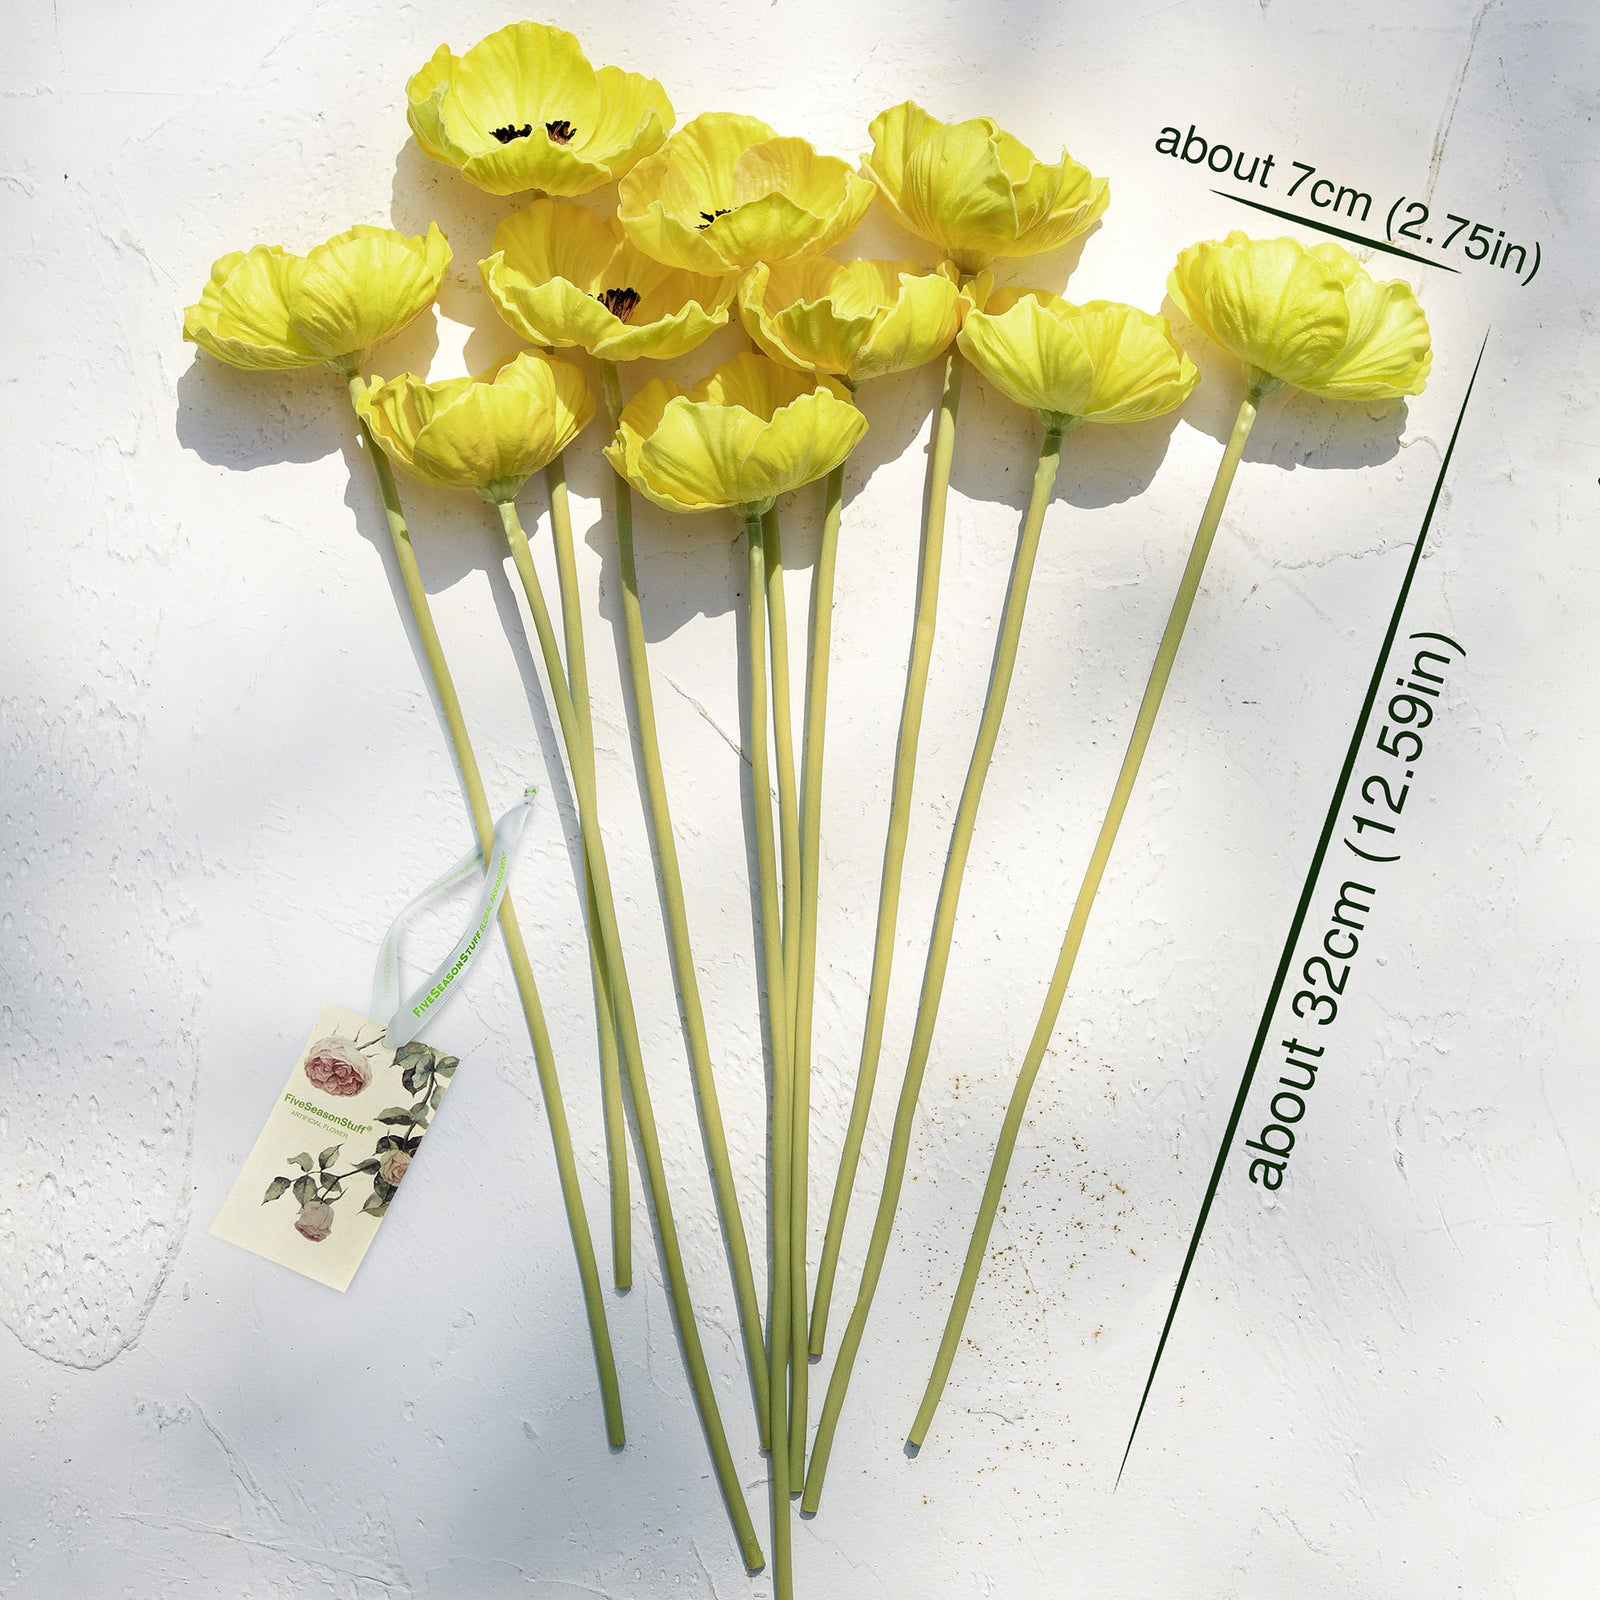 FiveSeasonStuff Yellow Real Touch Artificial Poppy Flowers Home Decoration Remembrance Day 10 Stems 12.6'' (32cm)